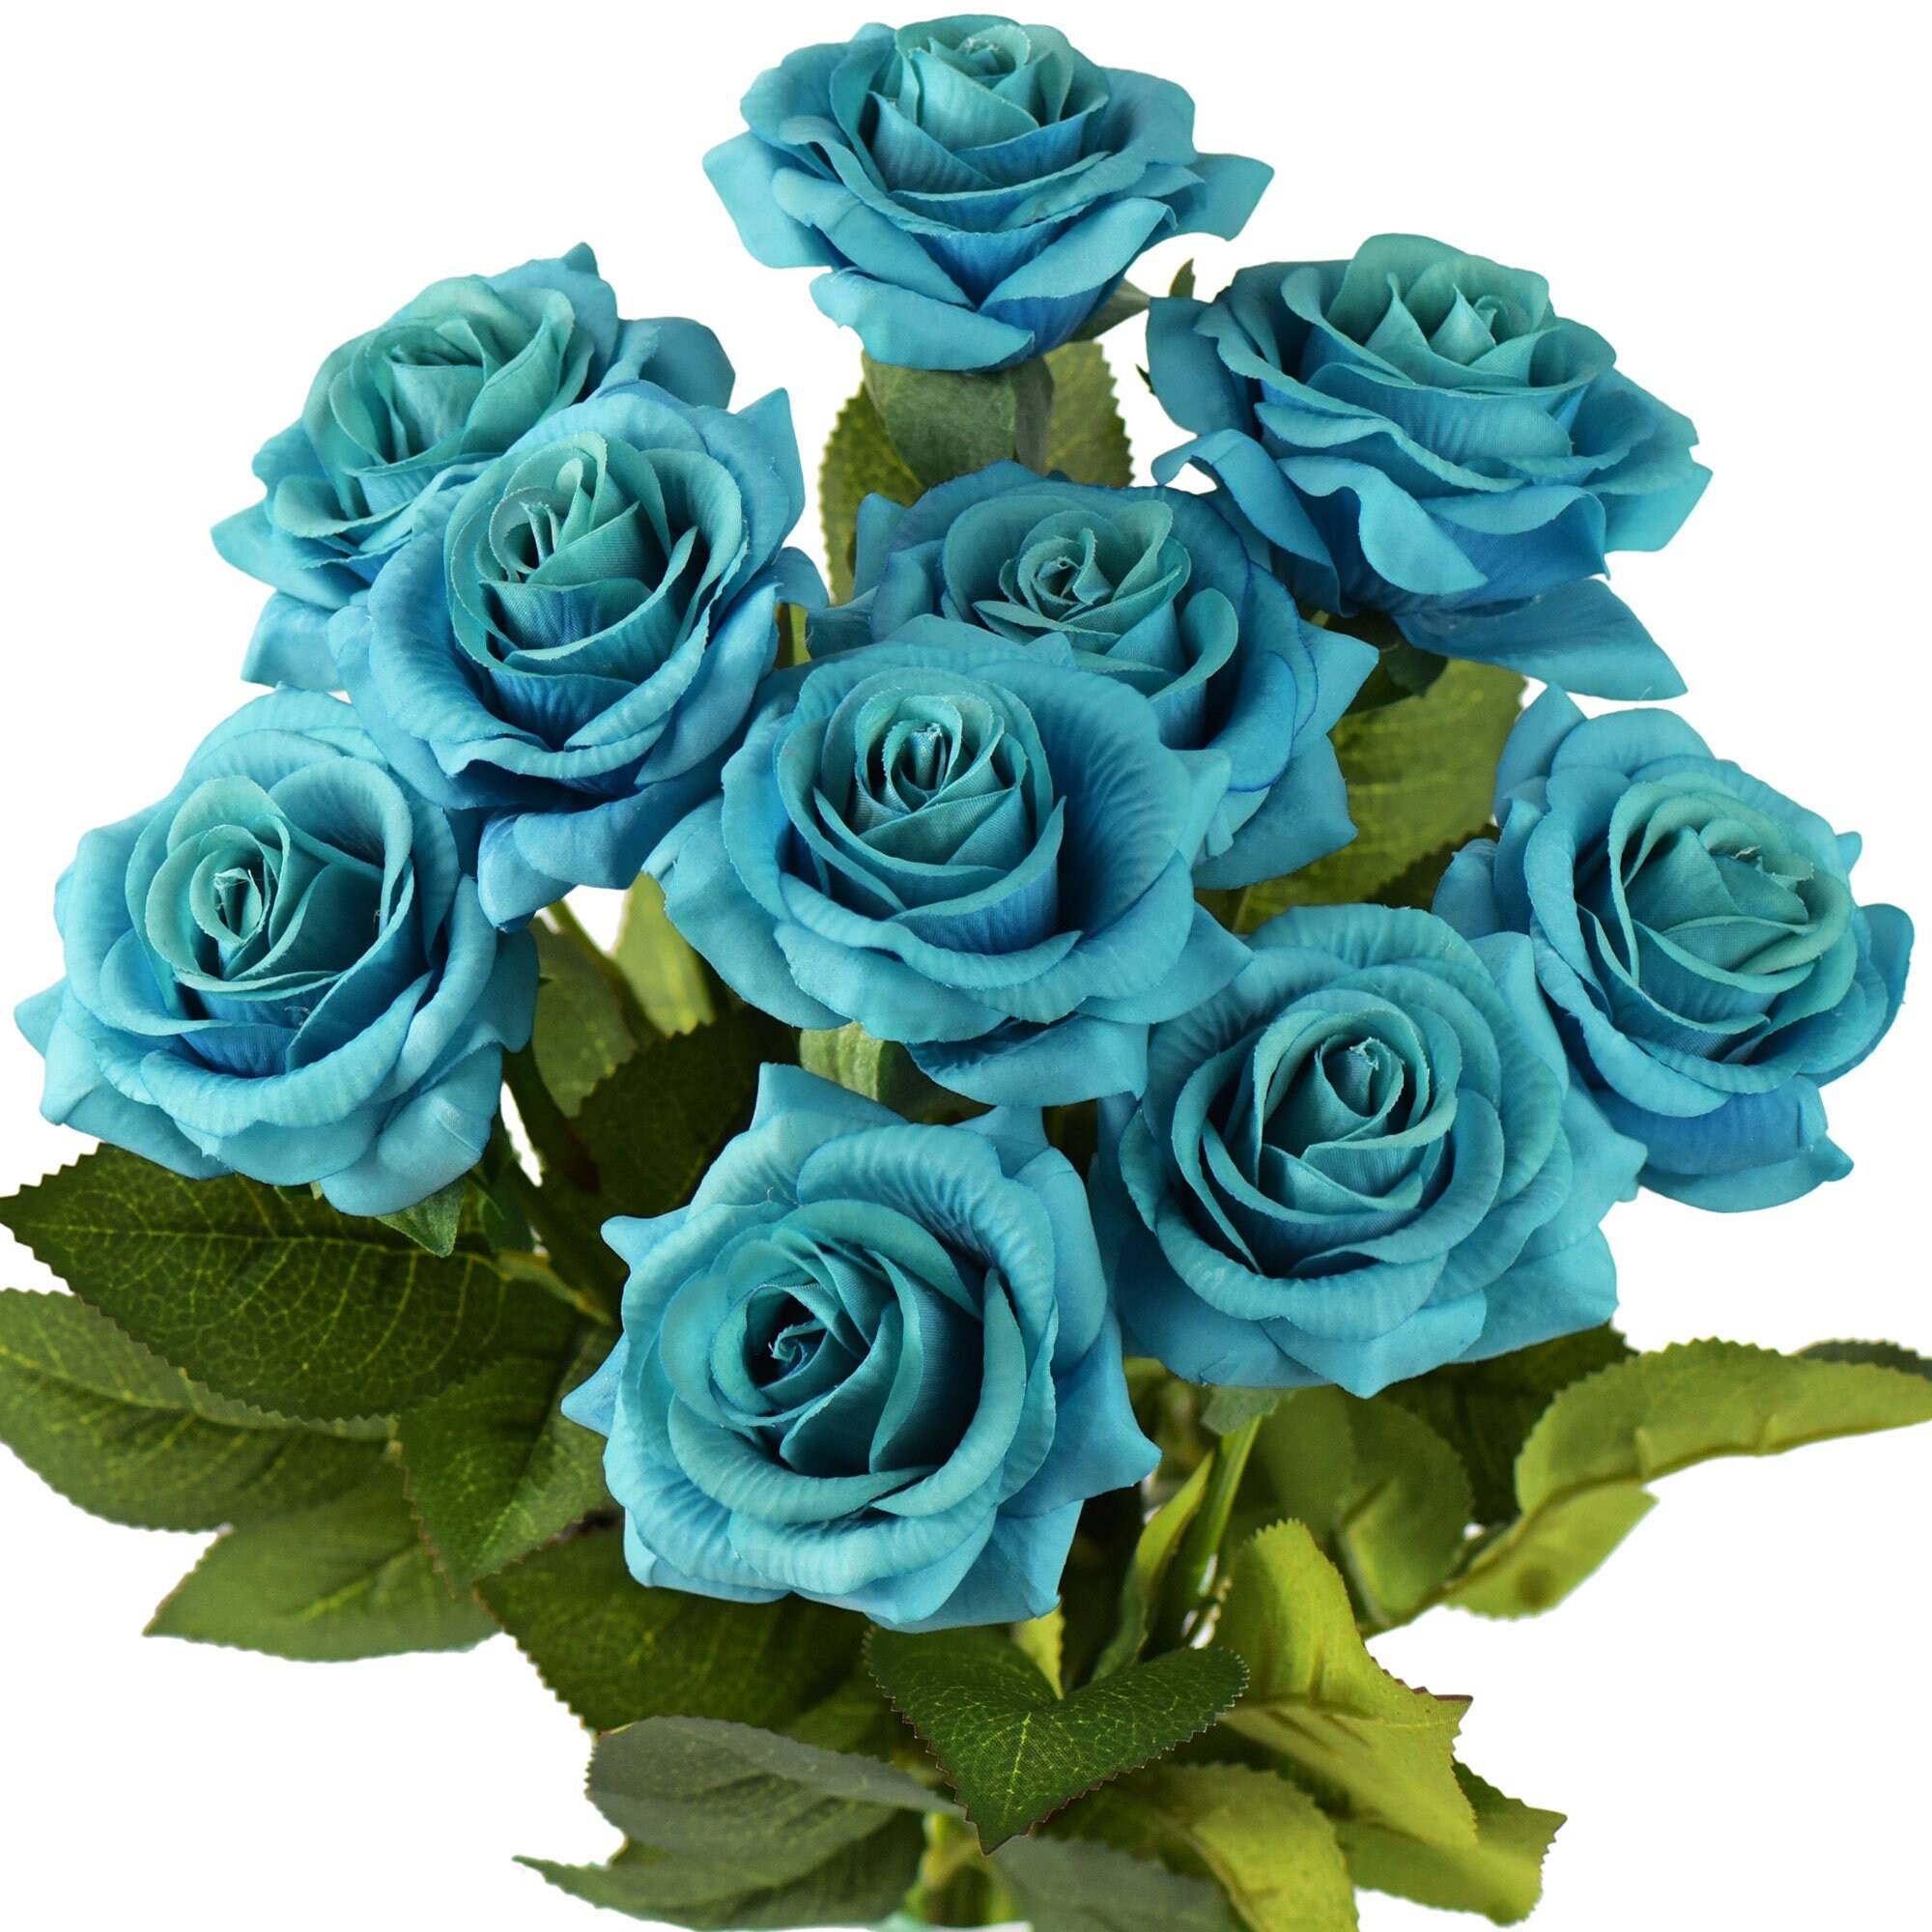 Blue With Hint of Teal Real Touch Roses Silk Artificial Flowers petals Feel  and Look Like Fresh Roses' 10 Stems Fiveseasonstuff Floral 